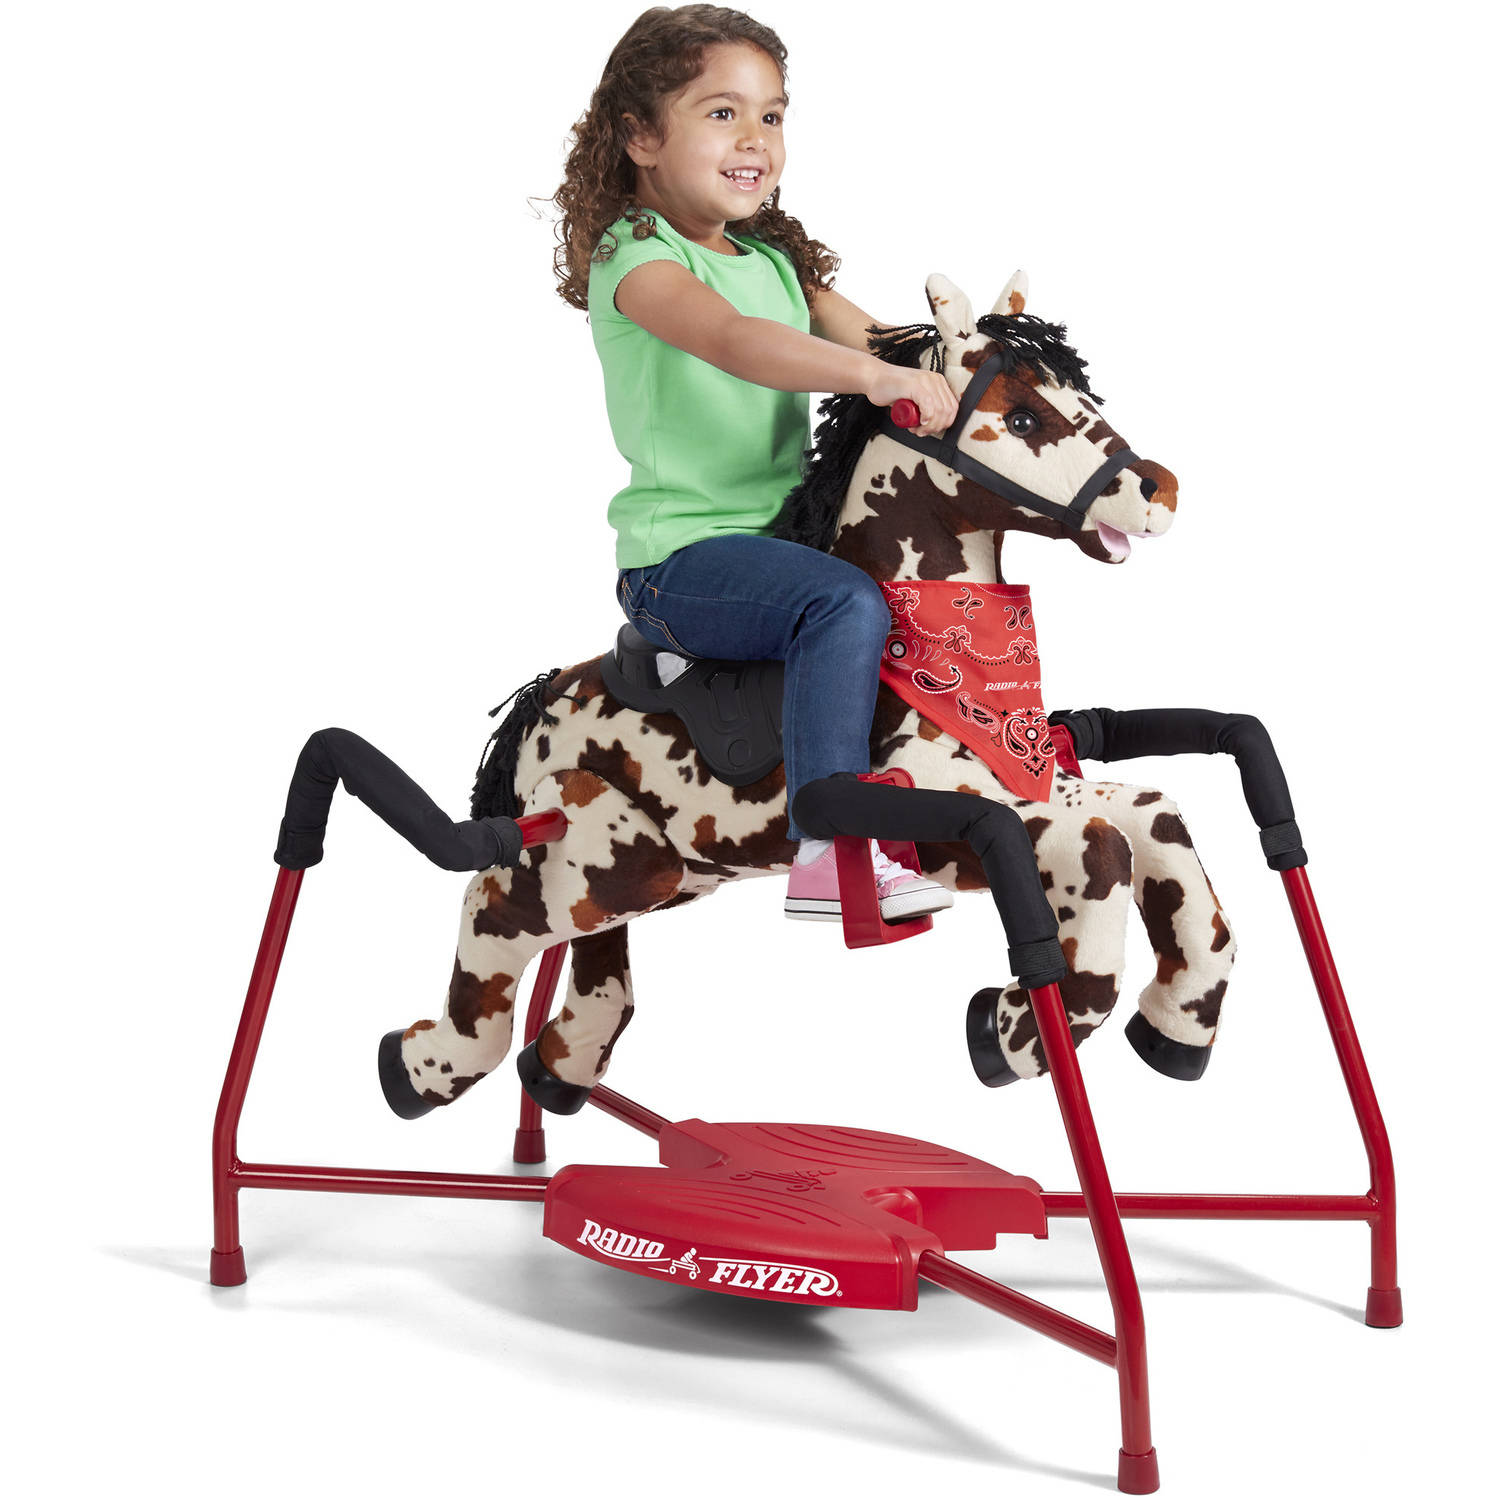 Radio Flyer, Freckles Interactive Spring Horse, Ride-on for Boys and Girls, for Kids 2 - 6 years old - image 2 of 18